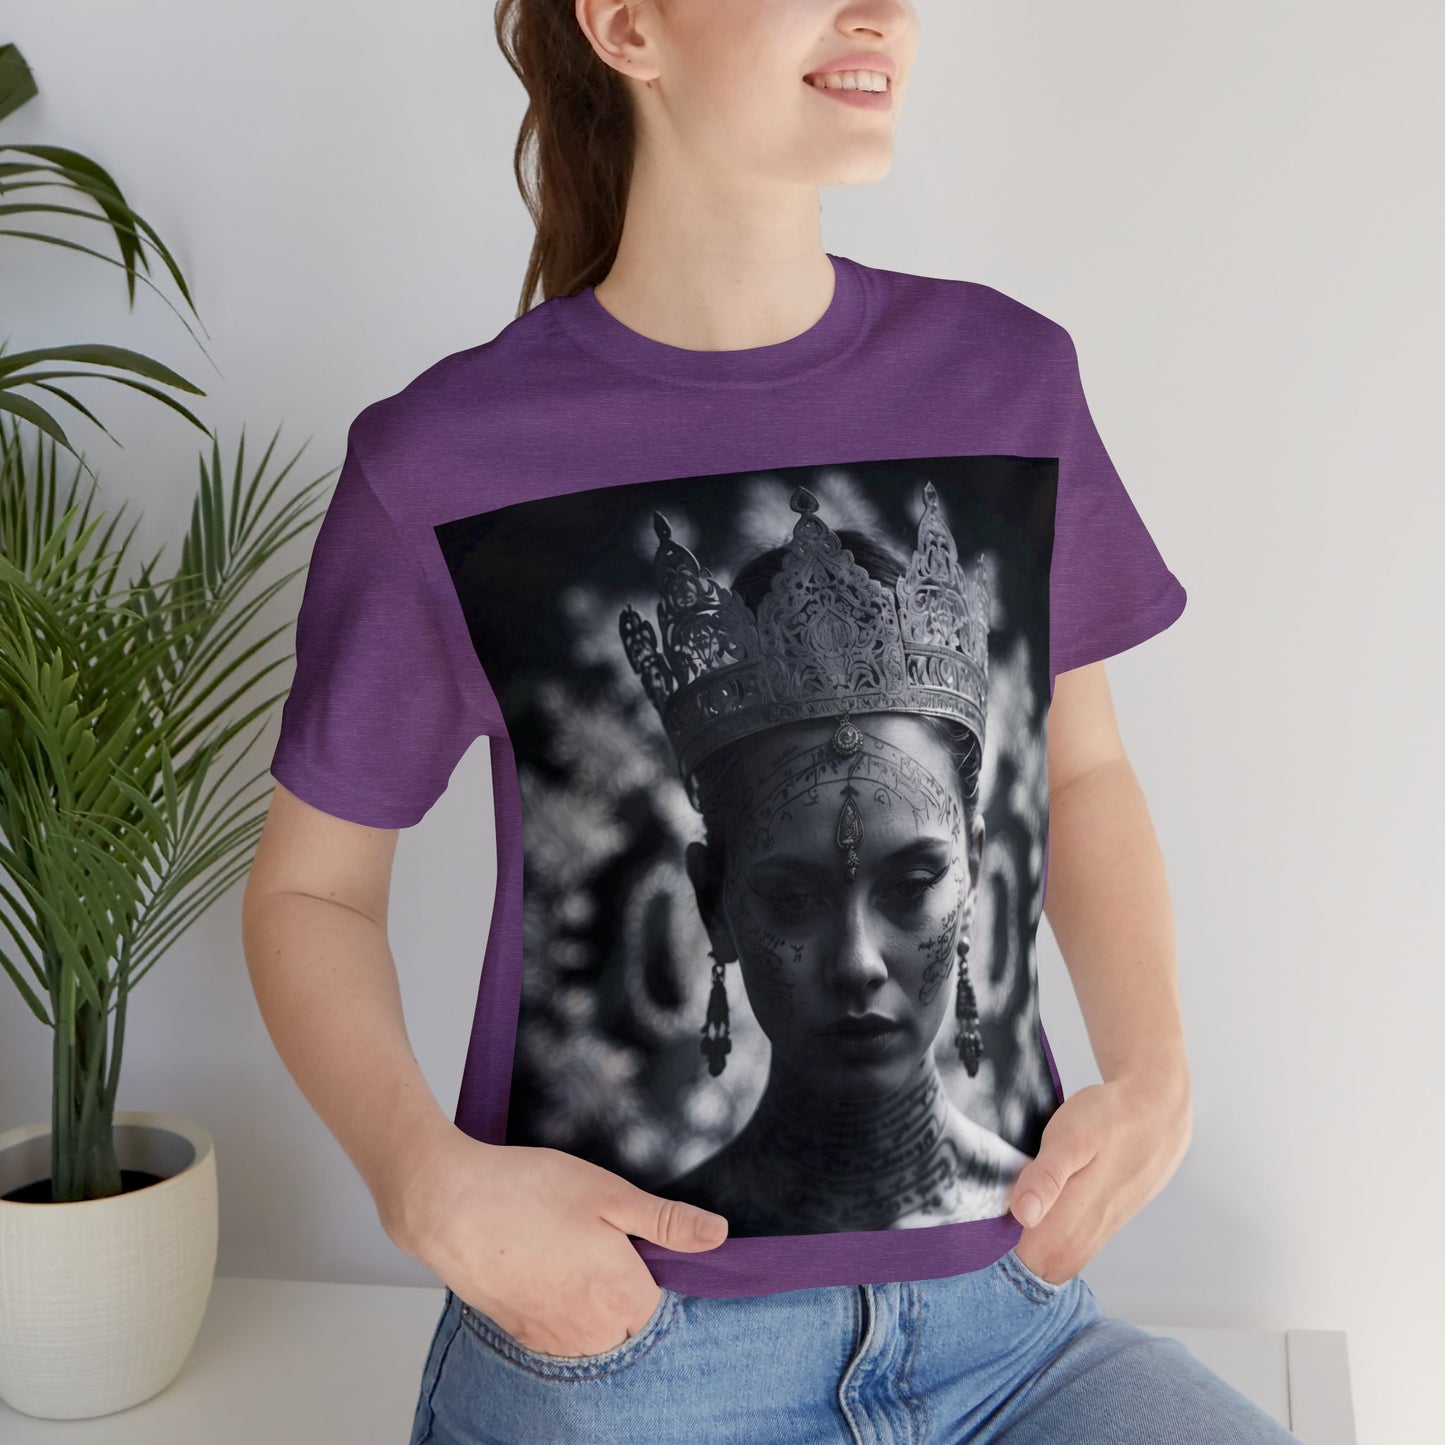 You Should See Me In A Crown | Photorealistic Graphic | Art | Tattooed Woman | Unisex | Men's | Women's | Tee | T-Shirt